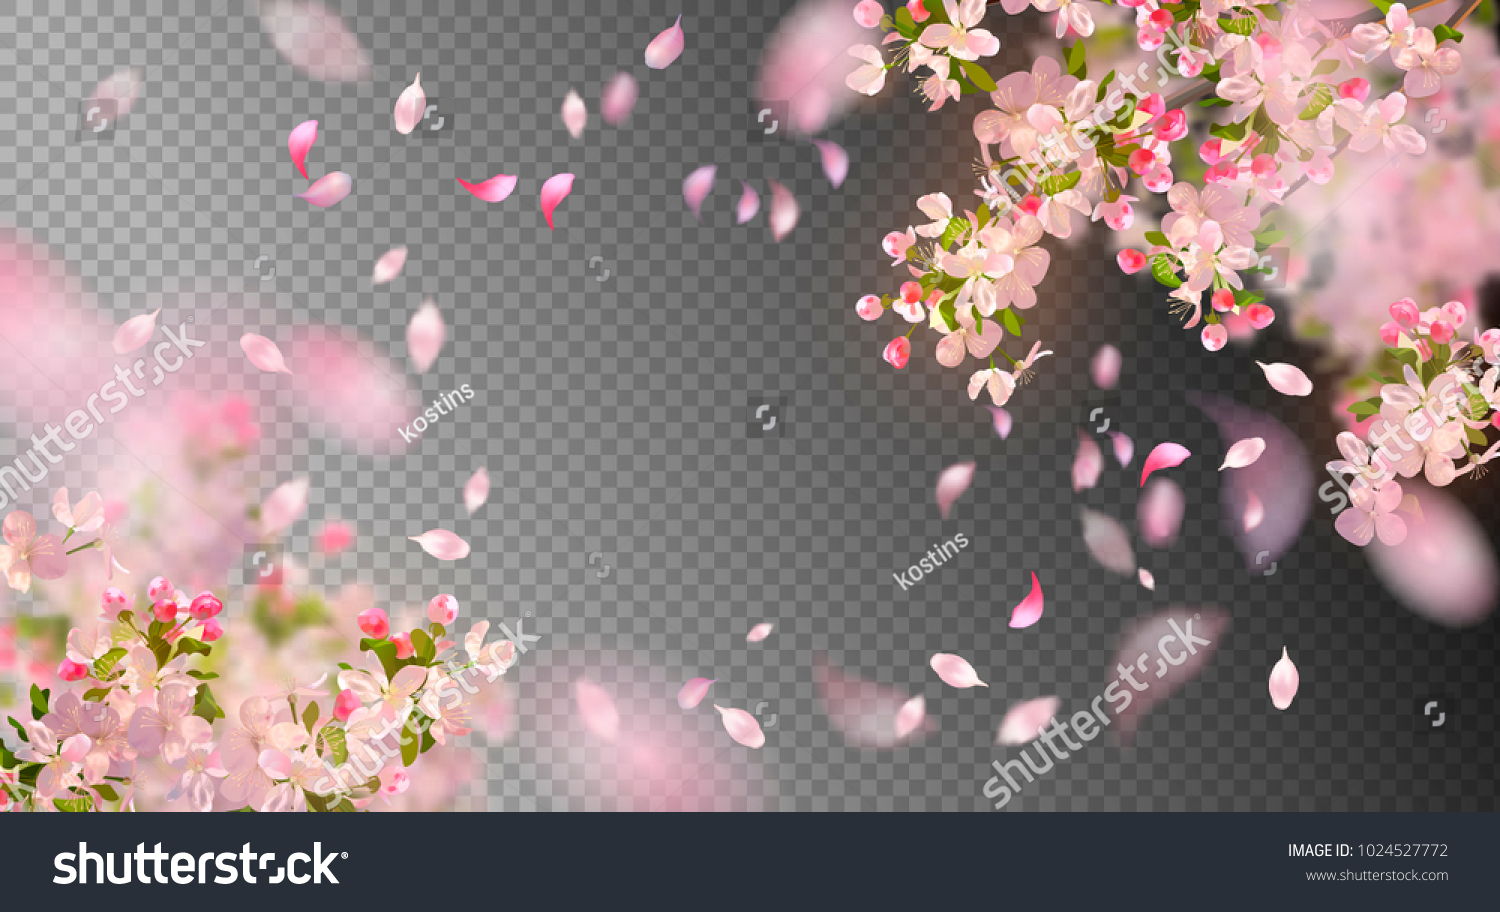 Vector background with spring cherry blossom. Sakura branch in springtime with falling petals and blurred transparent elements #1024527772